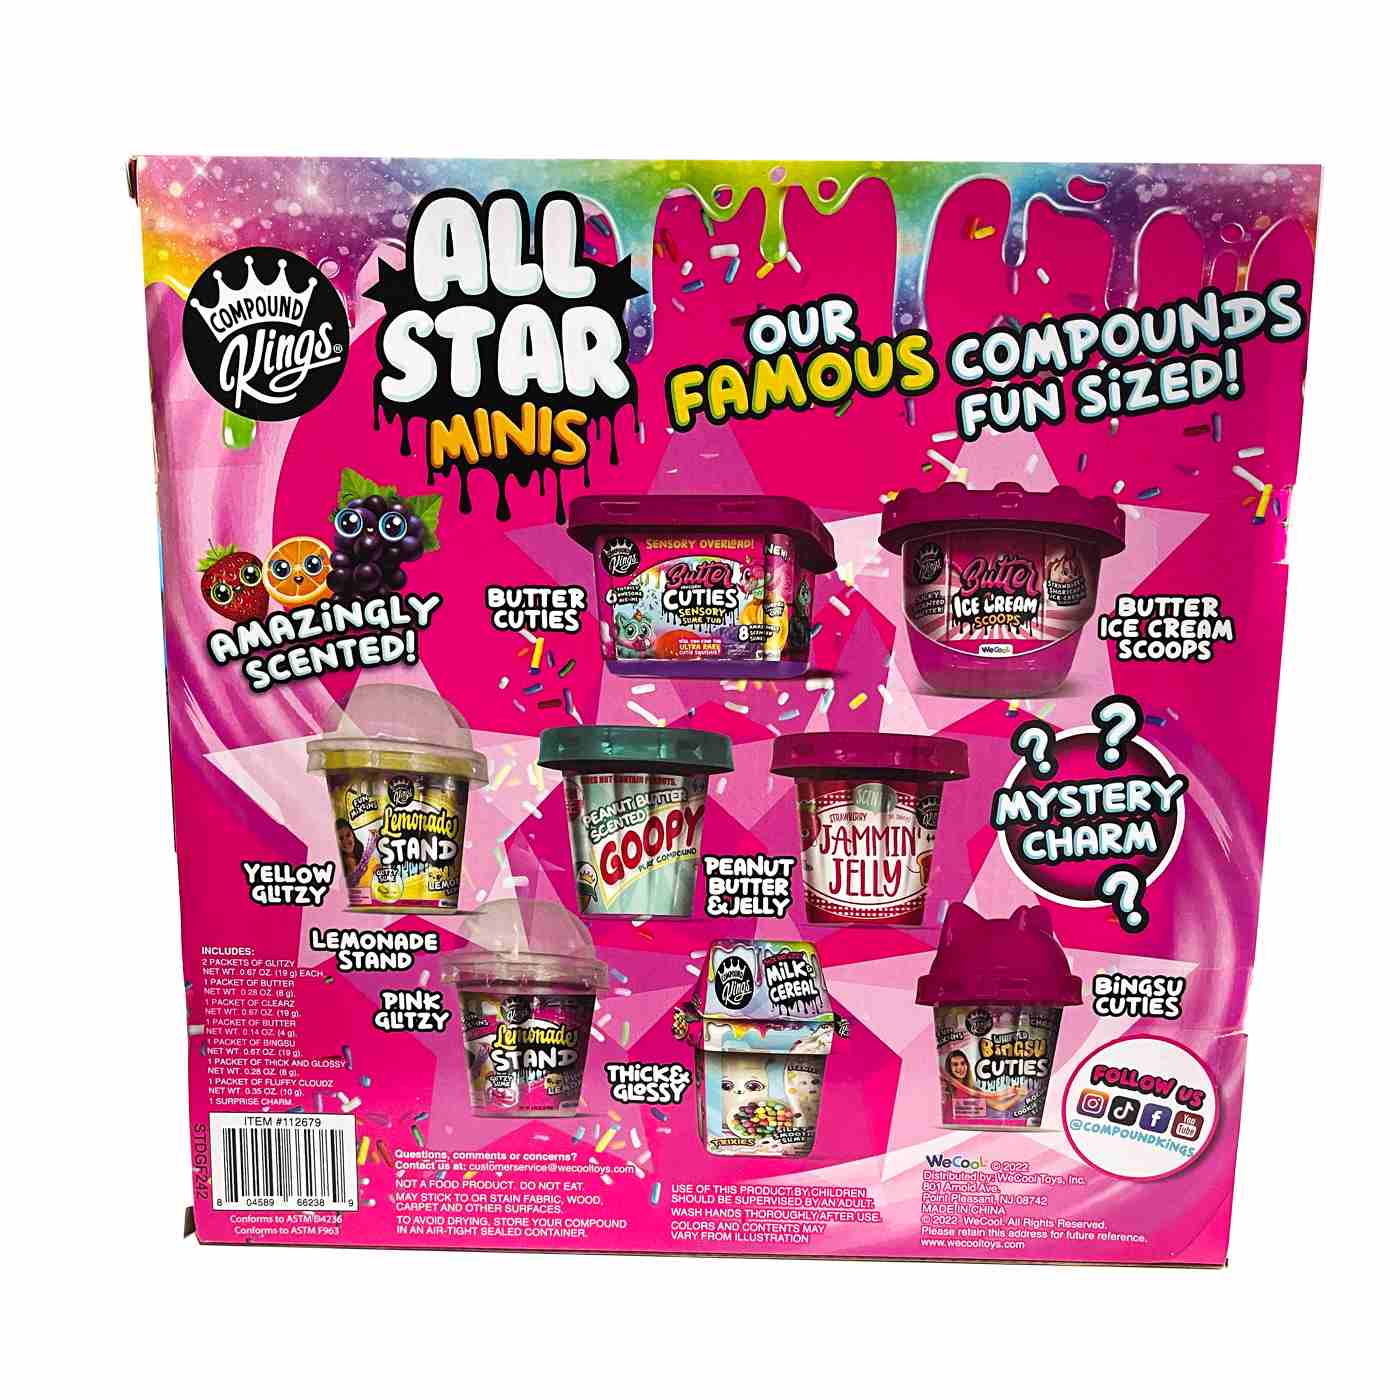 Compound Kings All Star Minis; image 2 of 2